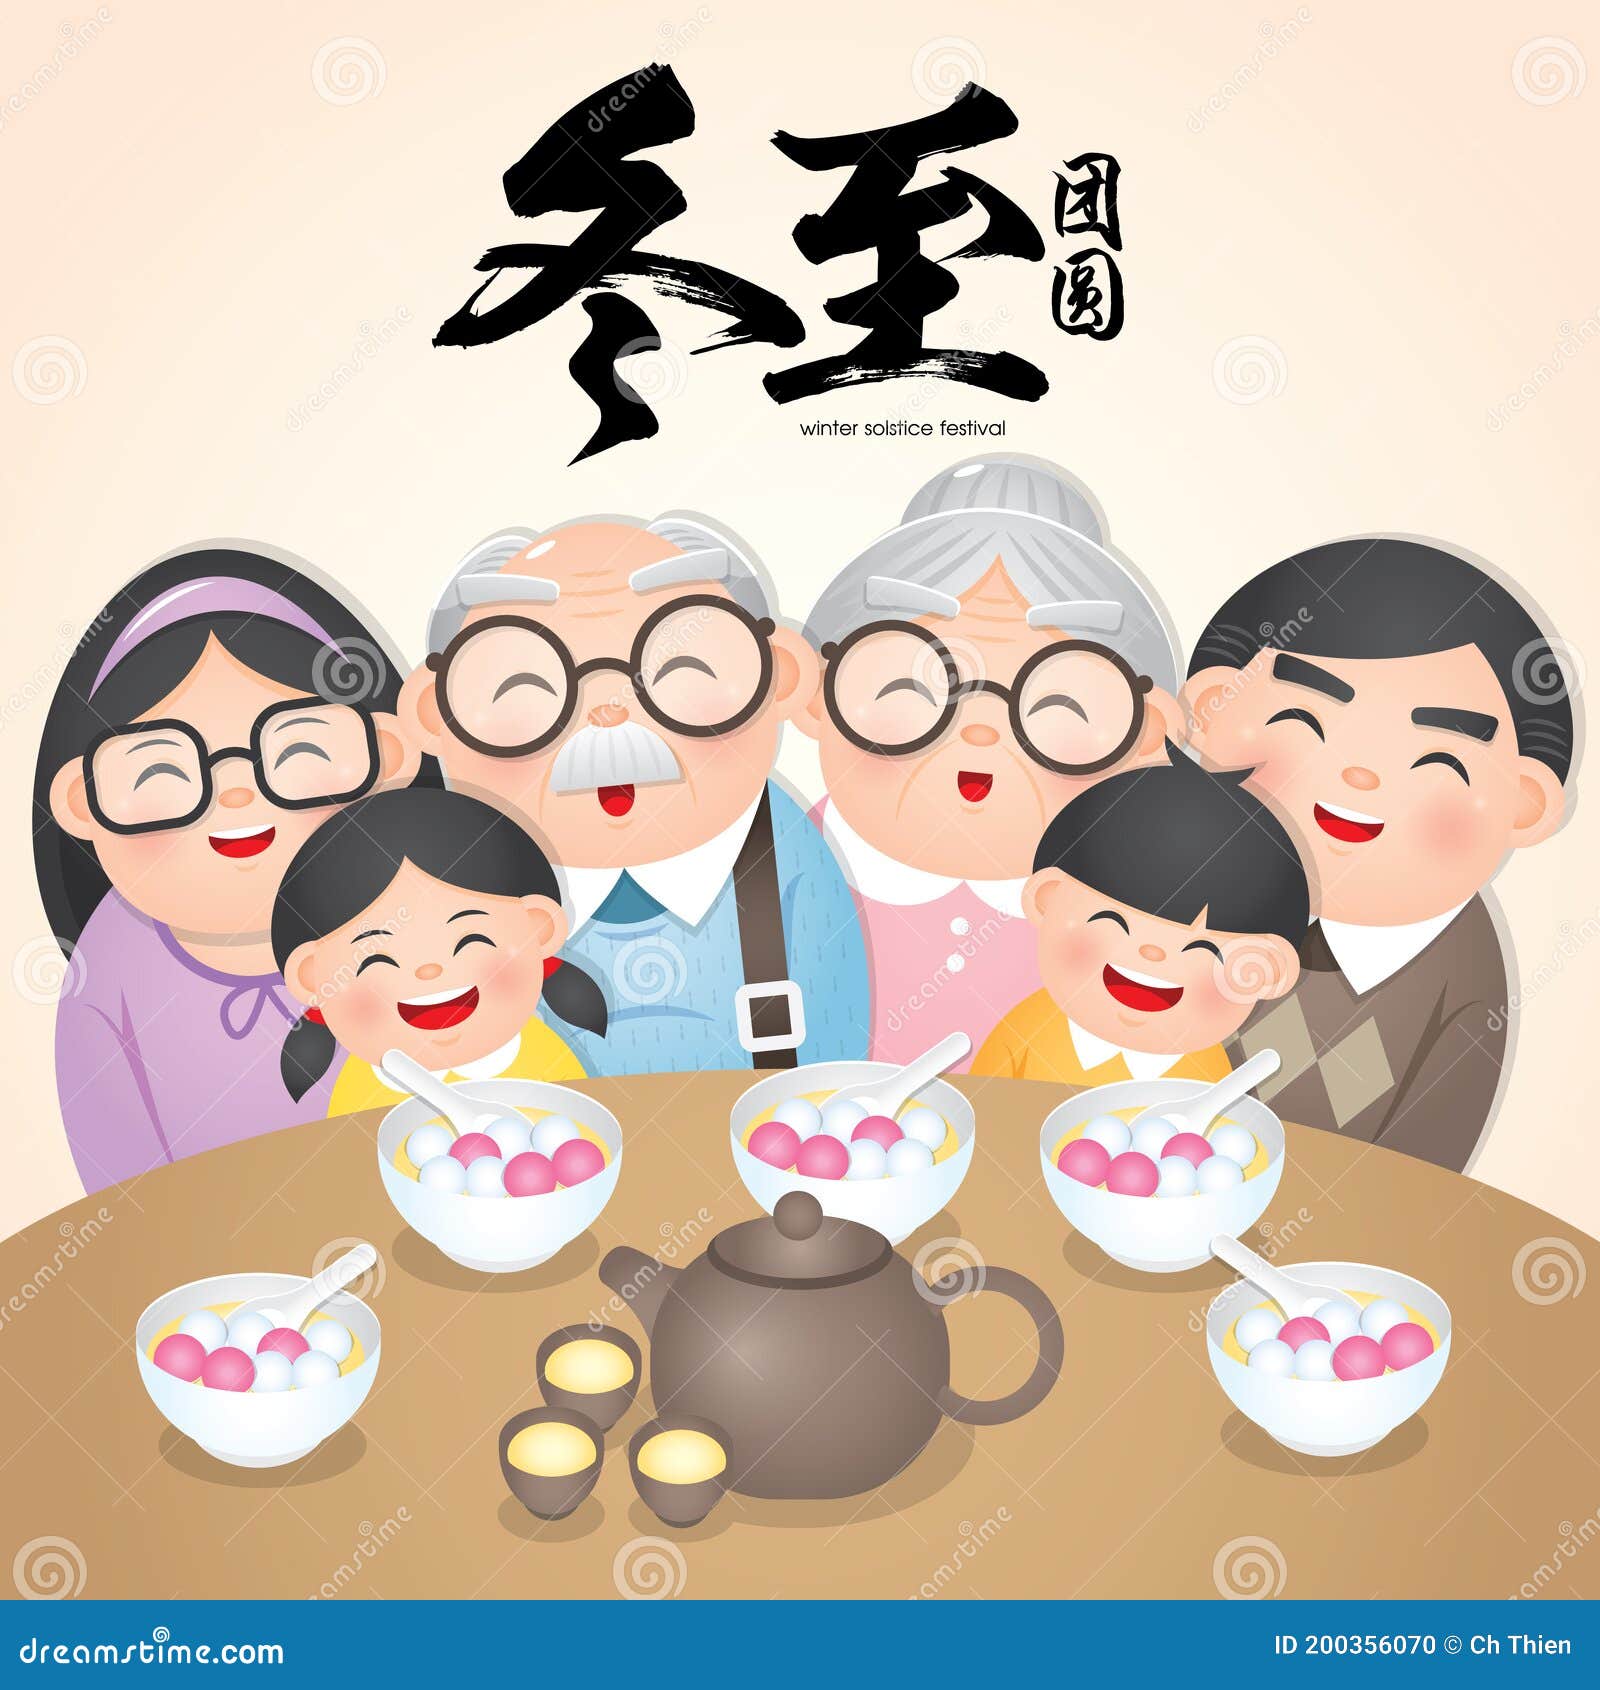 dong zhi means winter solstice festival. tangyuan sweet dumplings serve with soup. chinese cuisine with happy family reunion